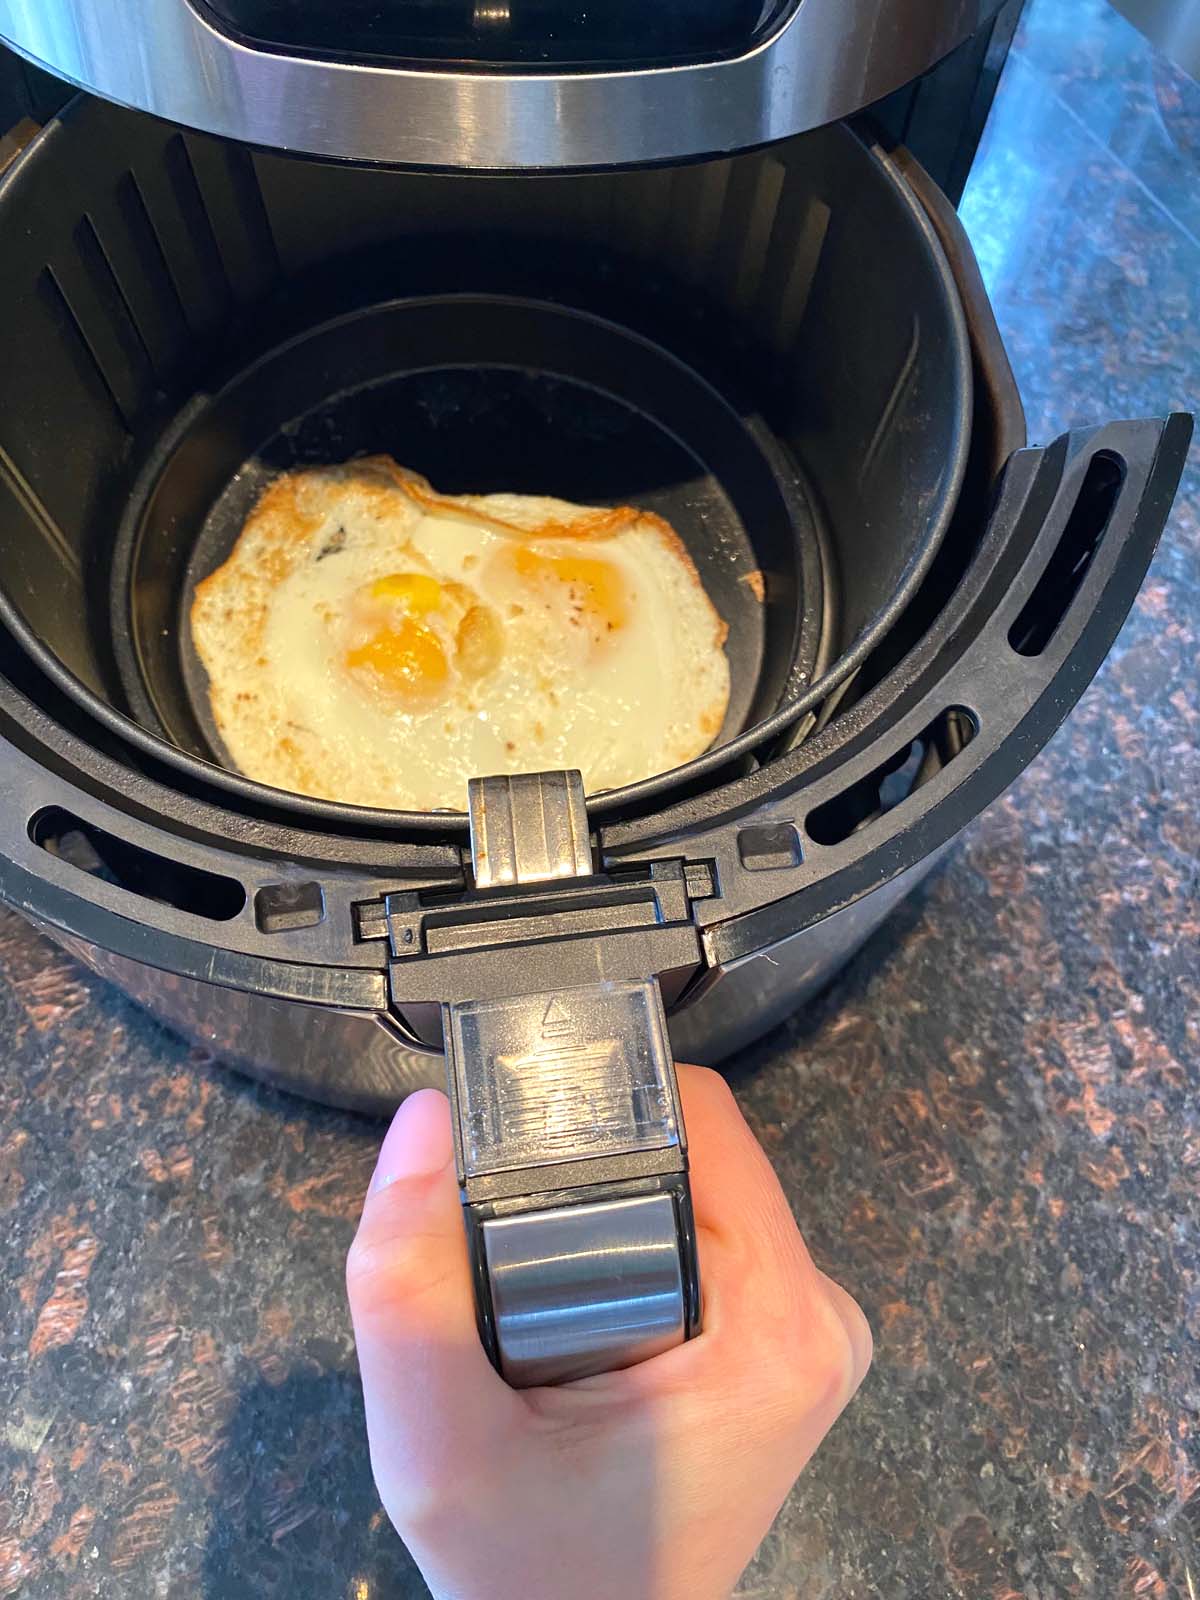 2 eggs in air fryer with the basket being removed.